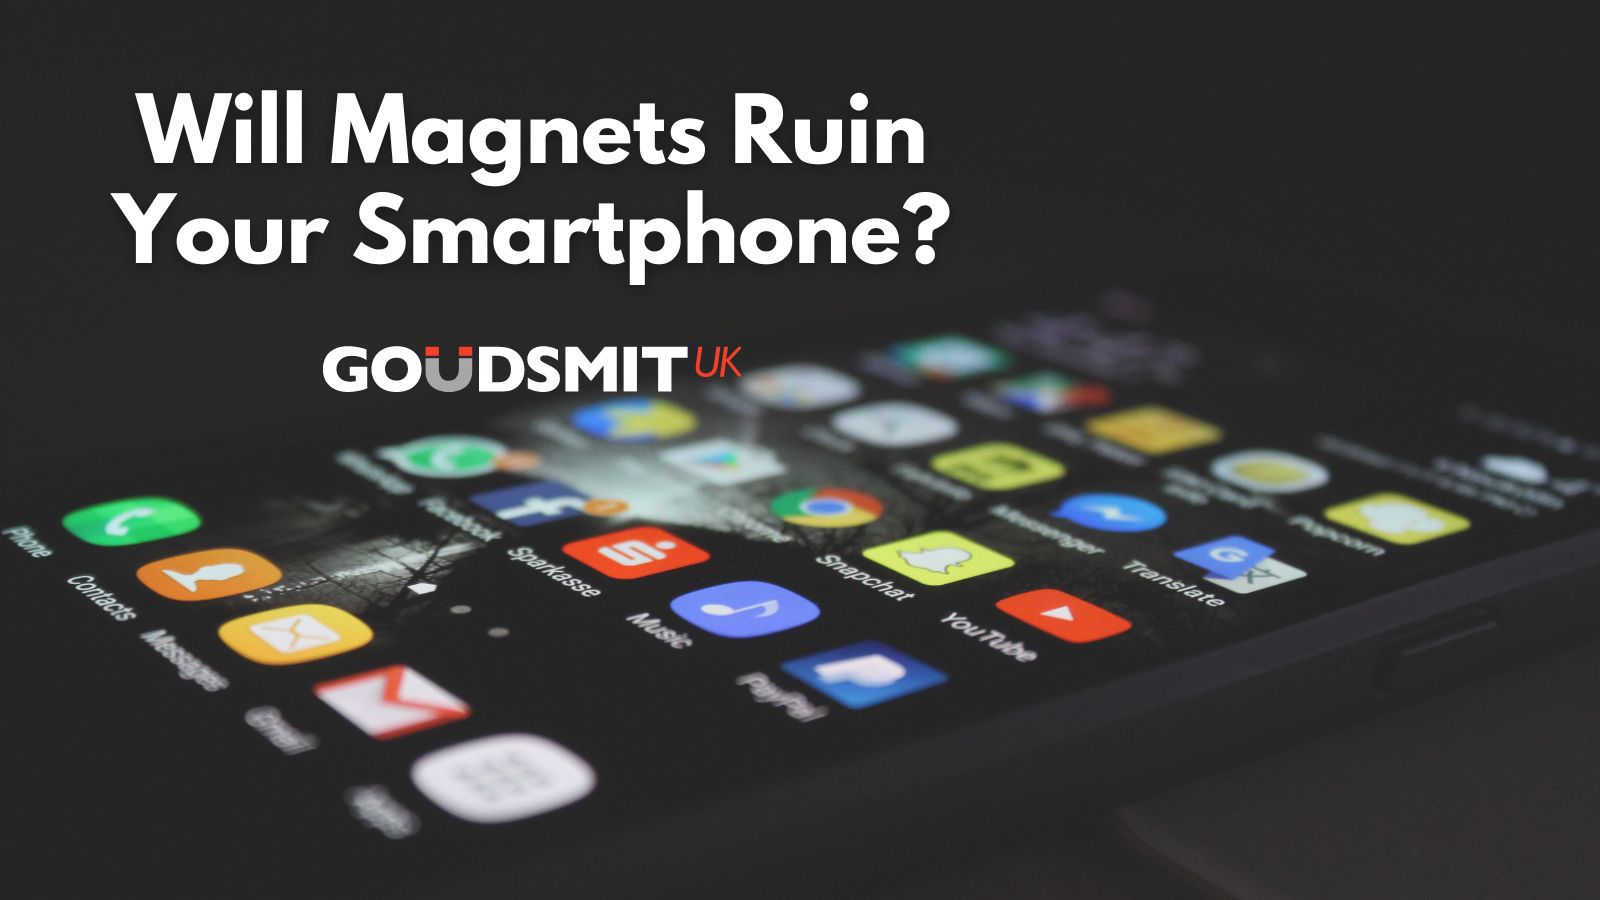 Magnets are still safe to use with your smartphone!